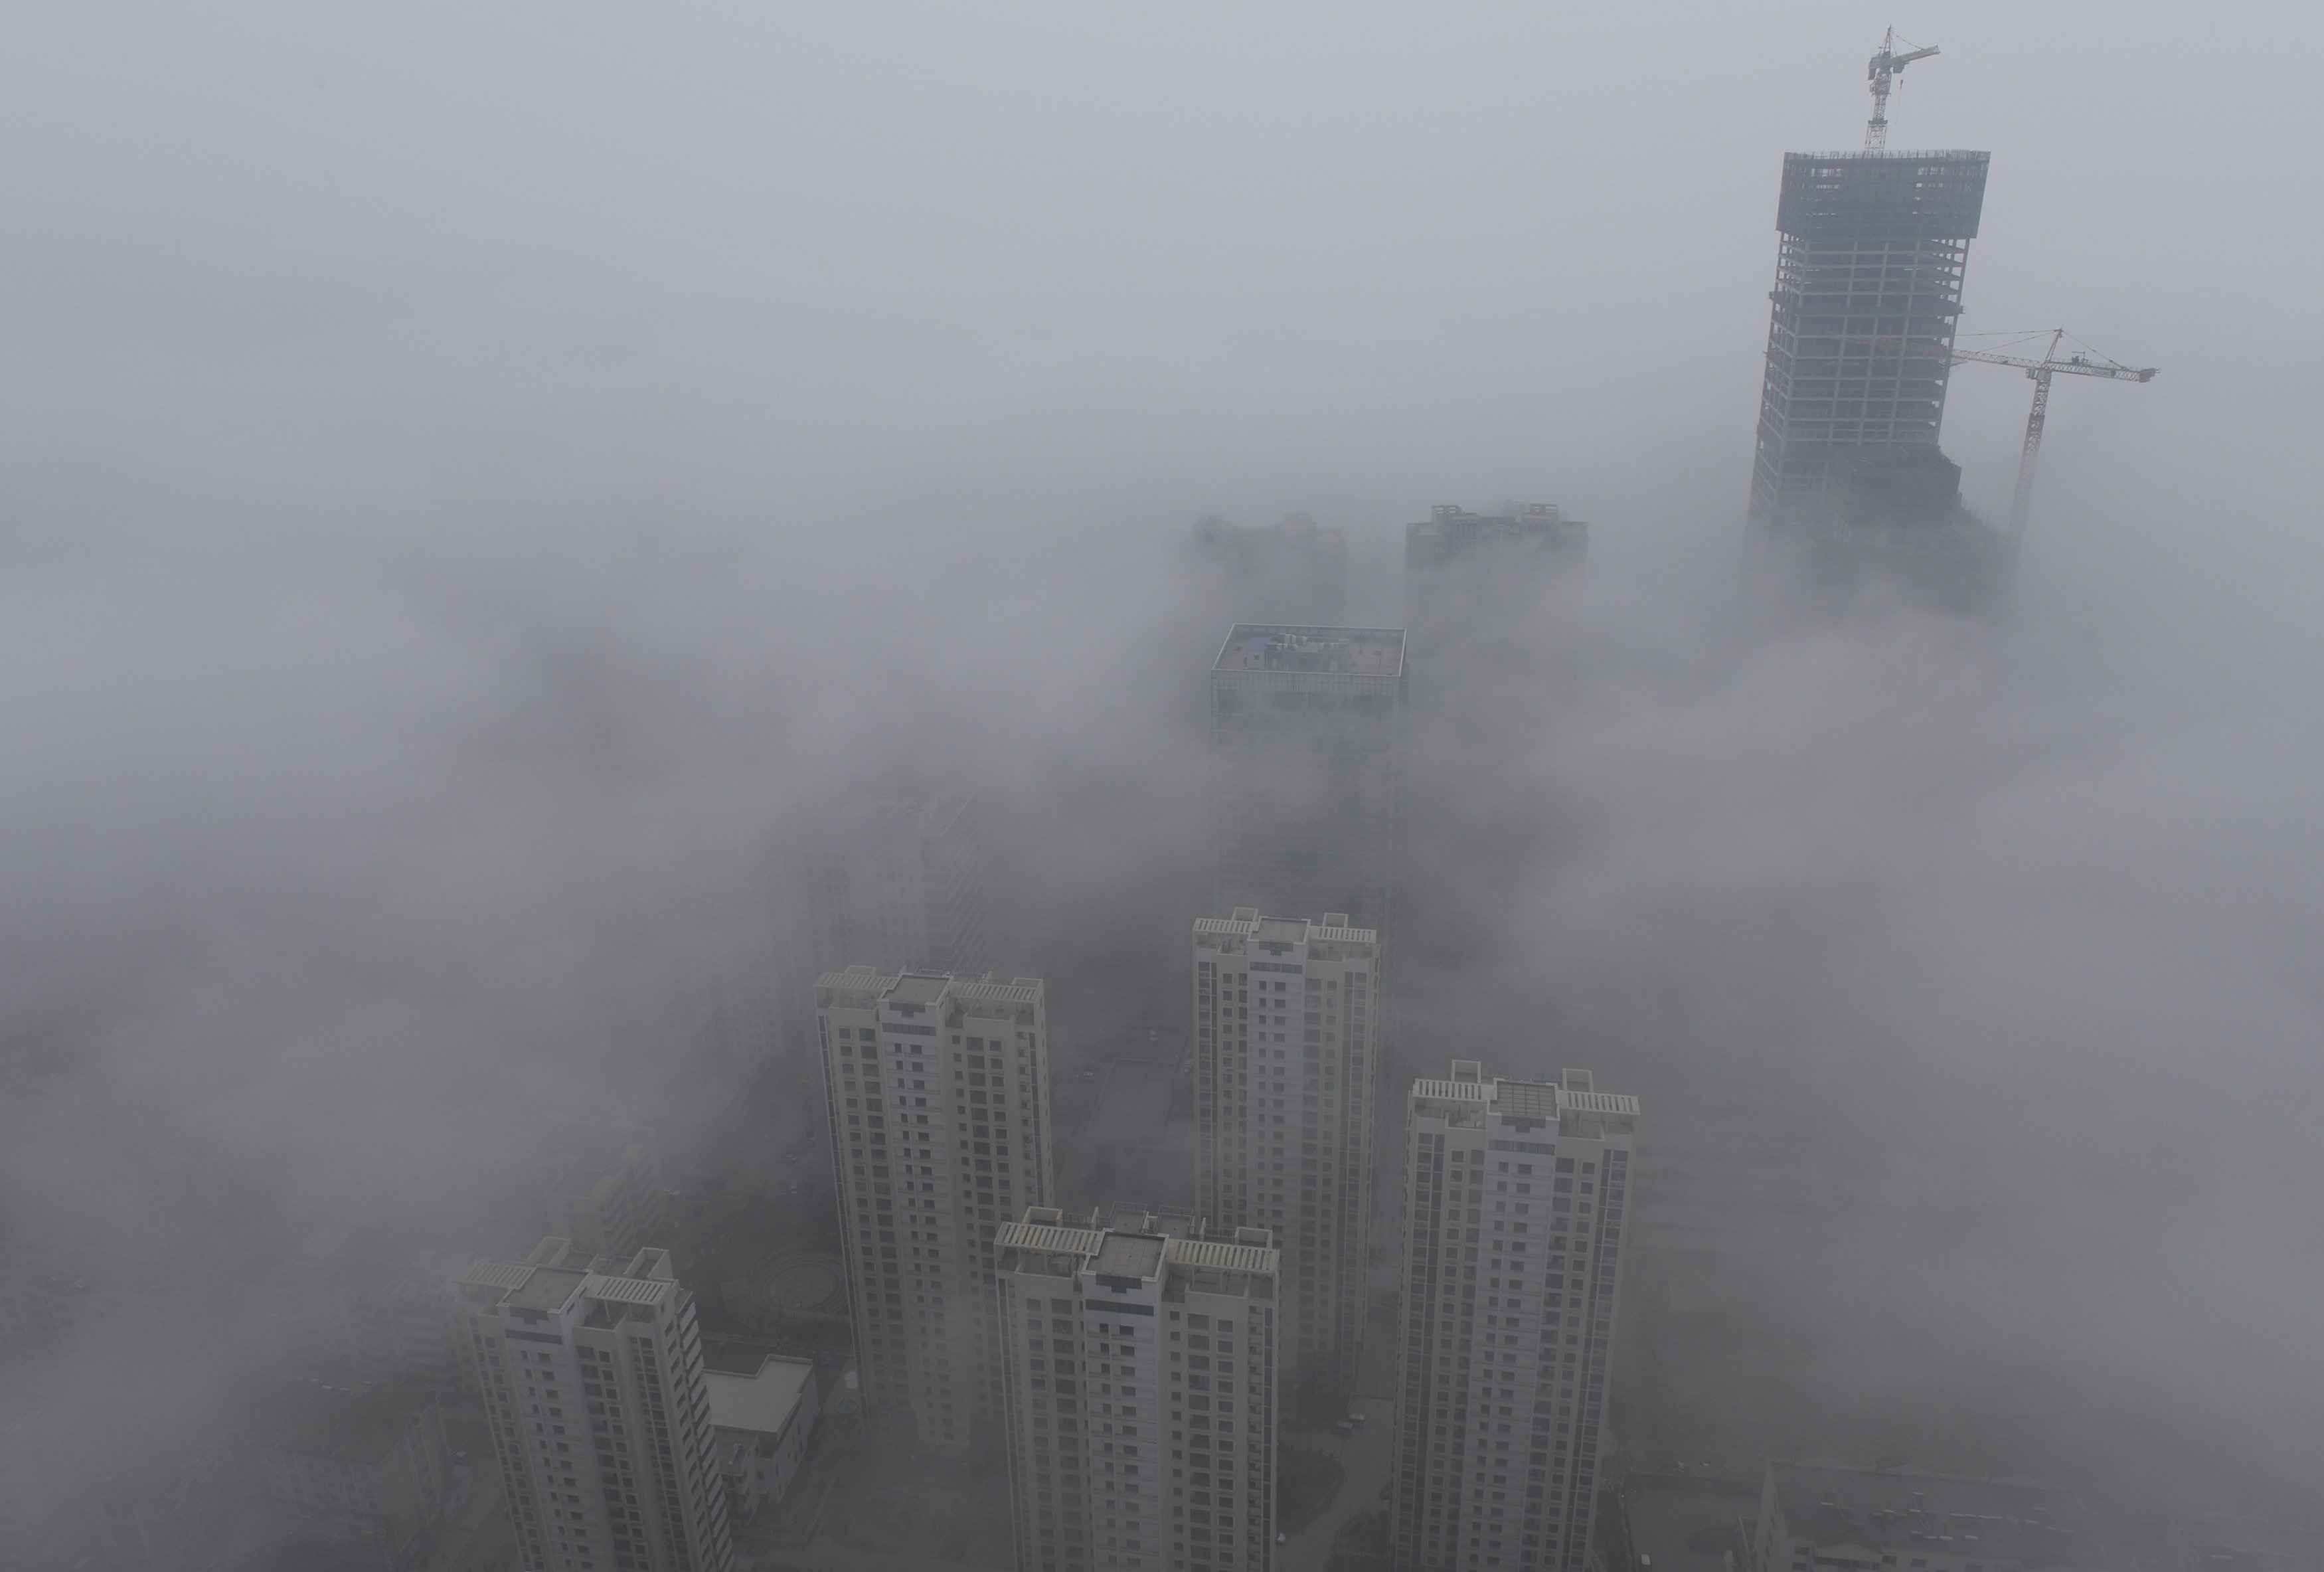 Buildings are seen shrouded in heavy haze at Qingdao development zone, Shandong province